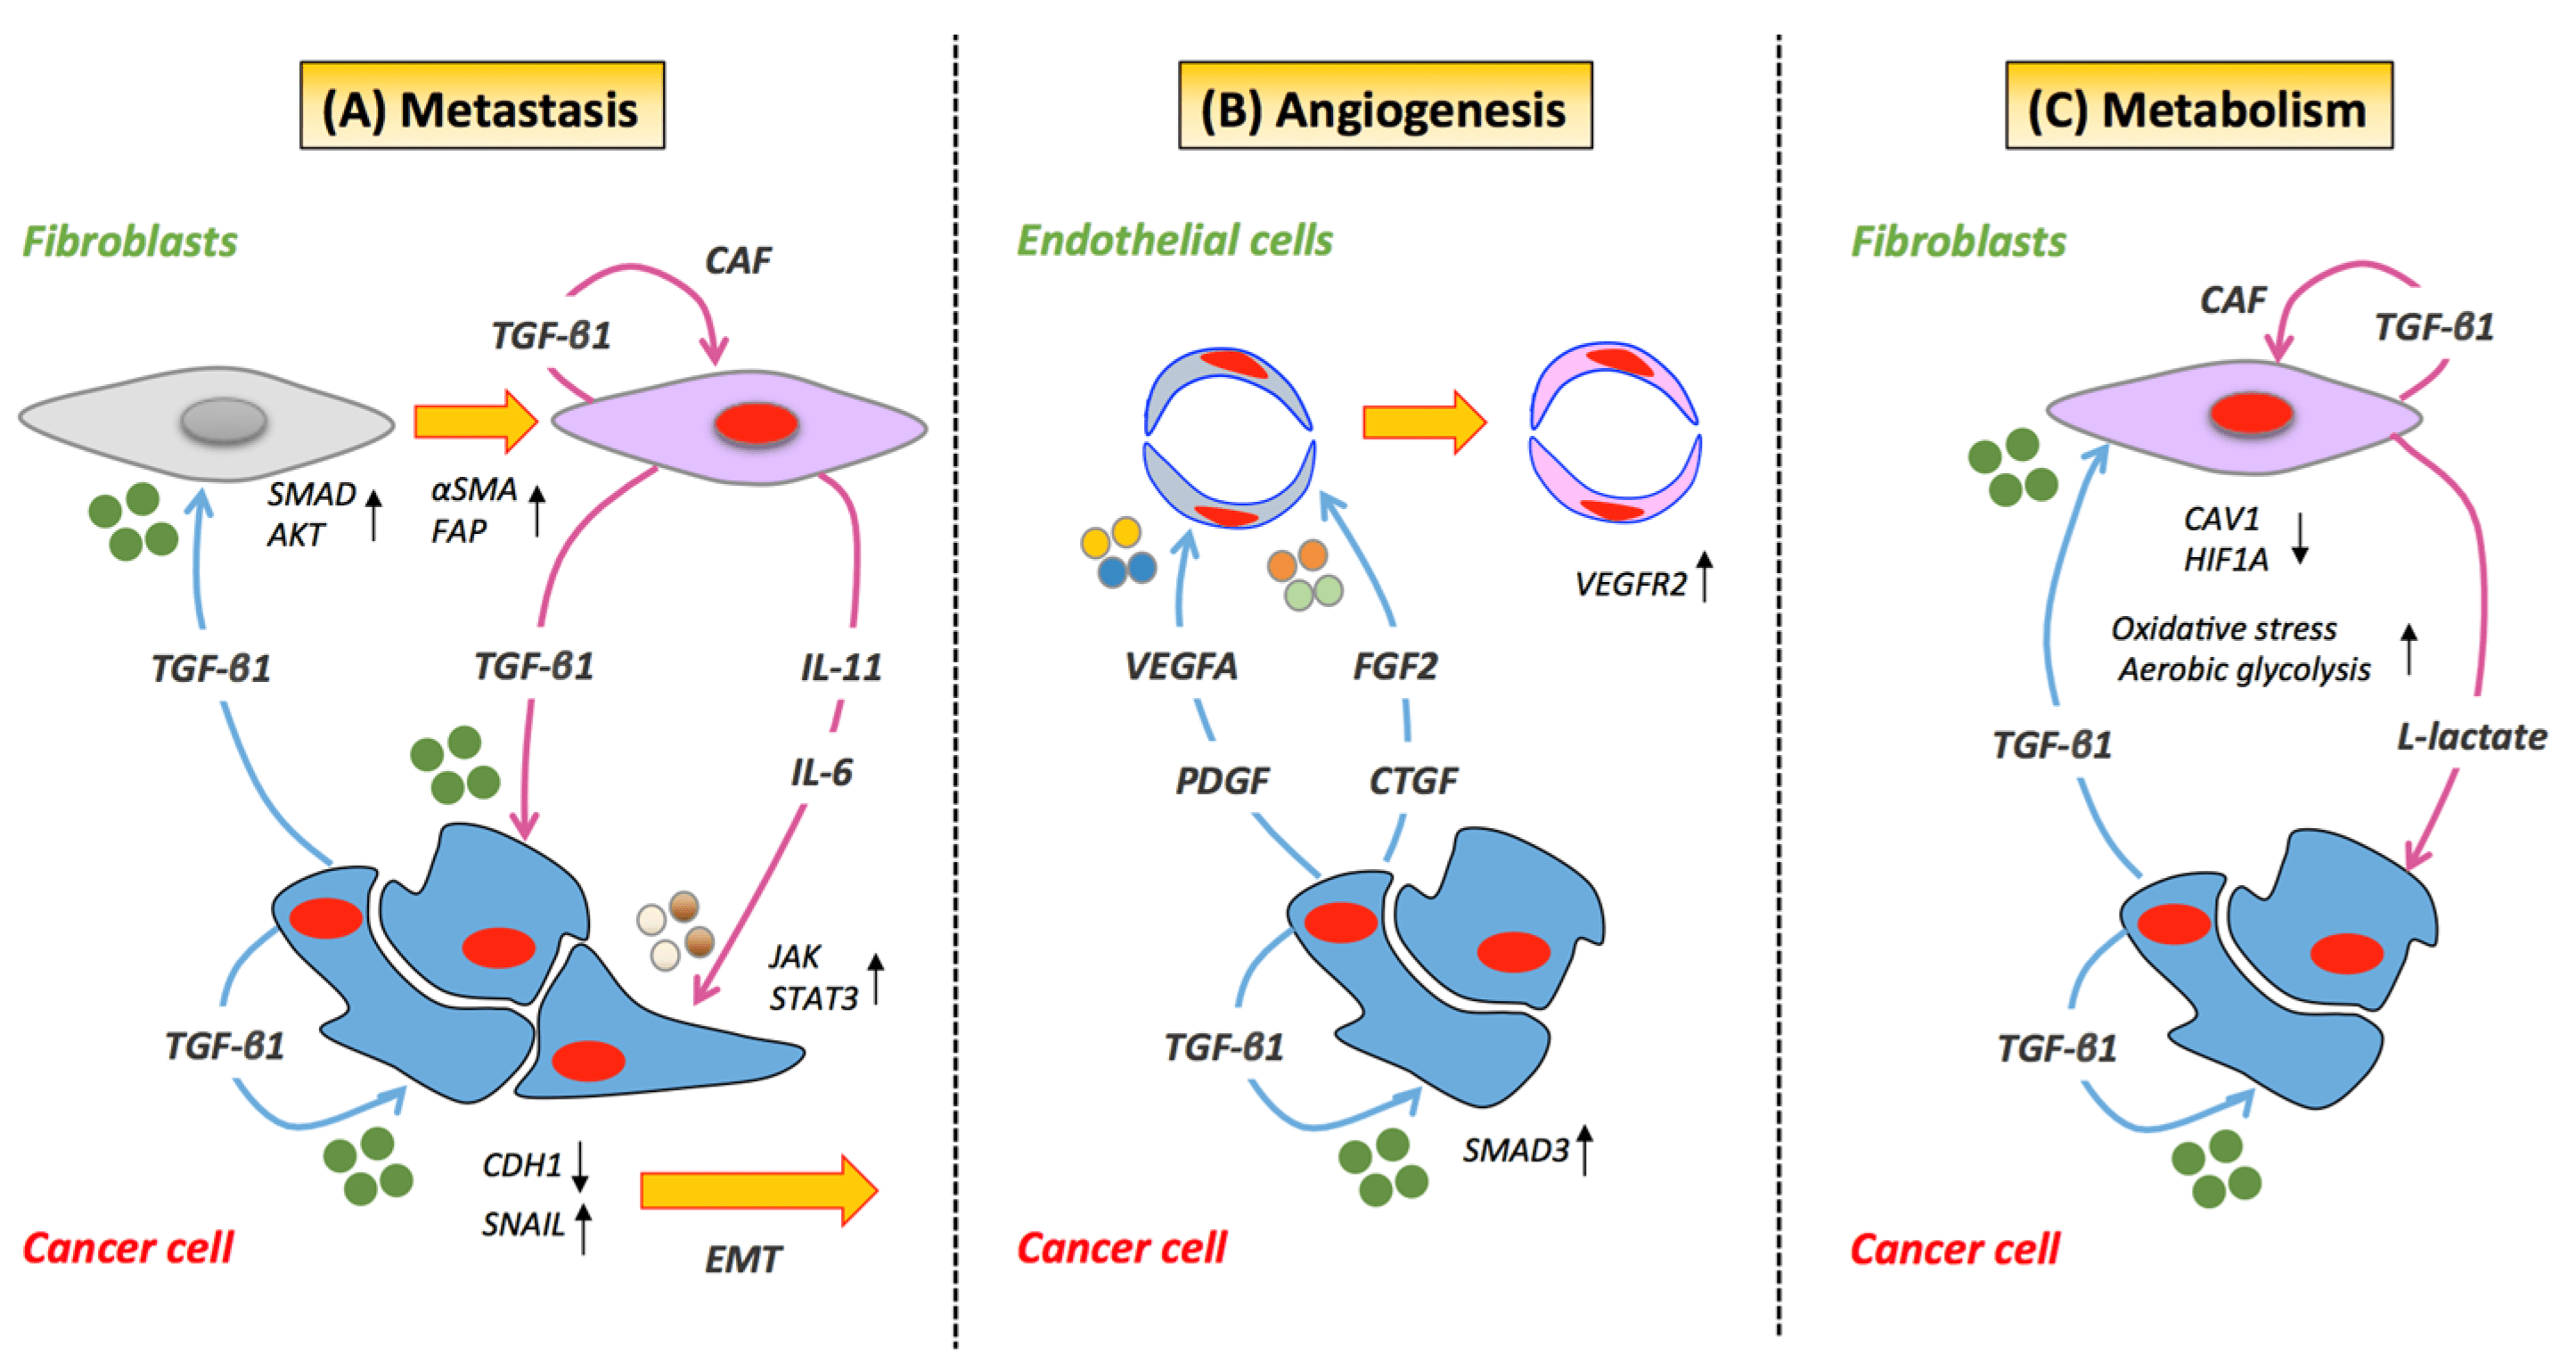 (A) TGF-β can activate resident stromal cells giving rise to cancer-associated fibroblasts (CAFs). (B) TGF-β can trigger angiogenesis in endothelial cells through activation of VEGFR2 by VEGF. (C) Cancer cells via the induction of aberrant TGF-β signaling can induce the down-regulation of CAV1 in adjacent fibroblasts leading to a CAF phenotype.